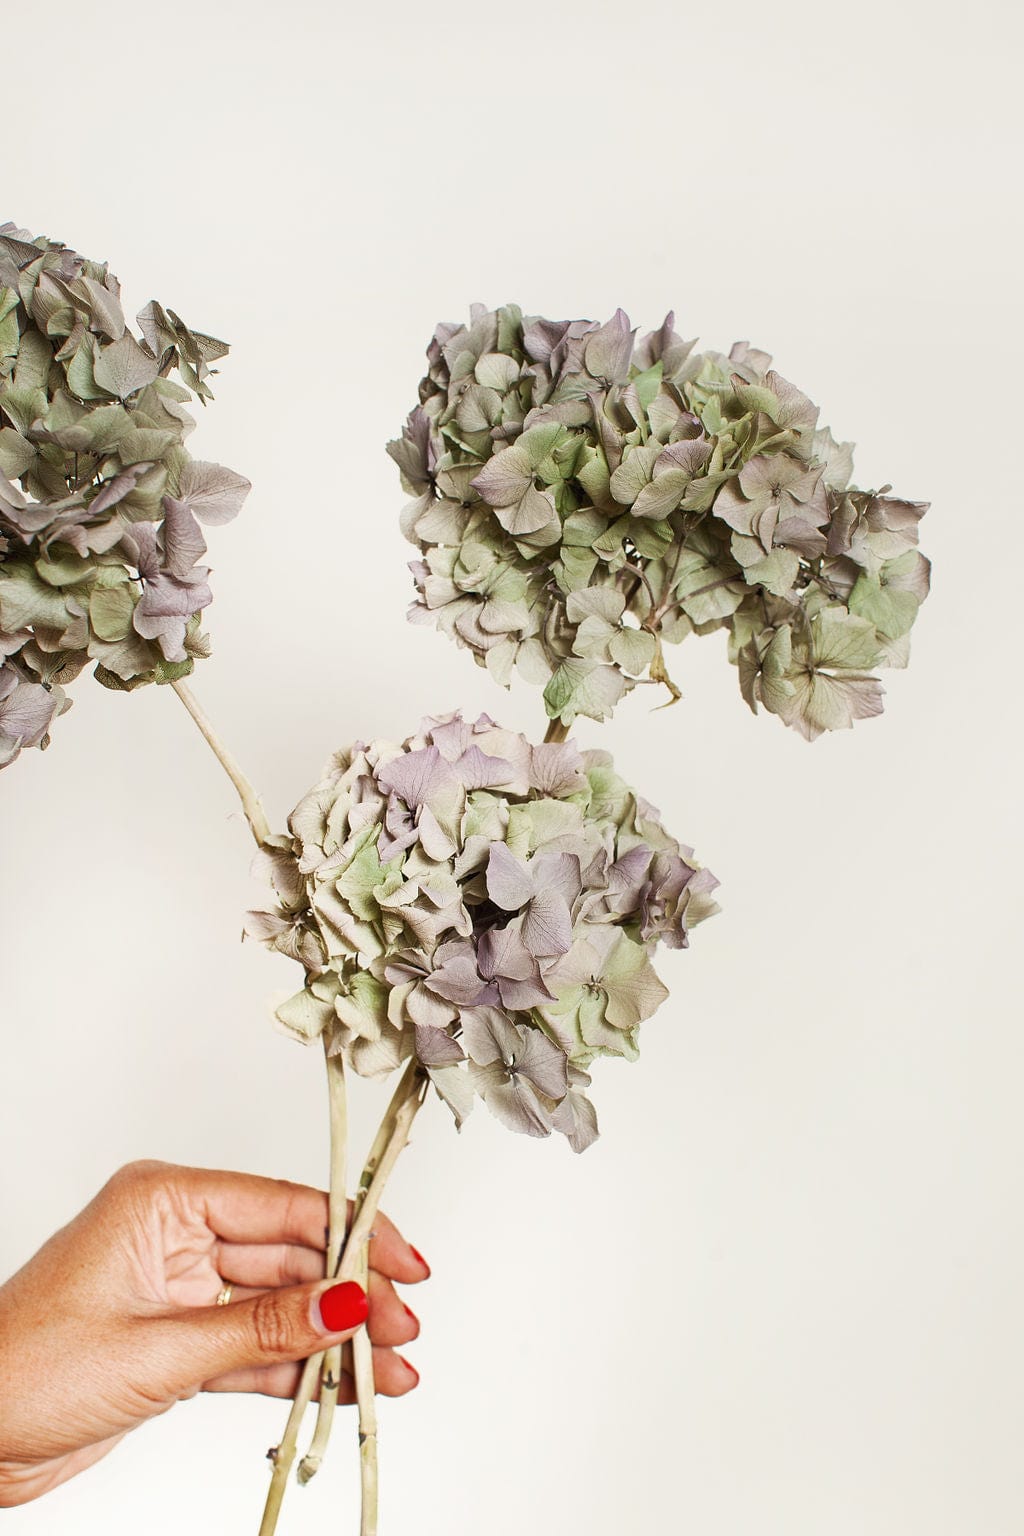 Idlewild Floral Co. Bunches Royal Lavender-Green Hydrangea